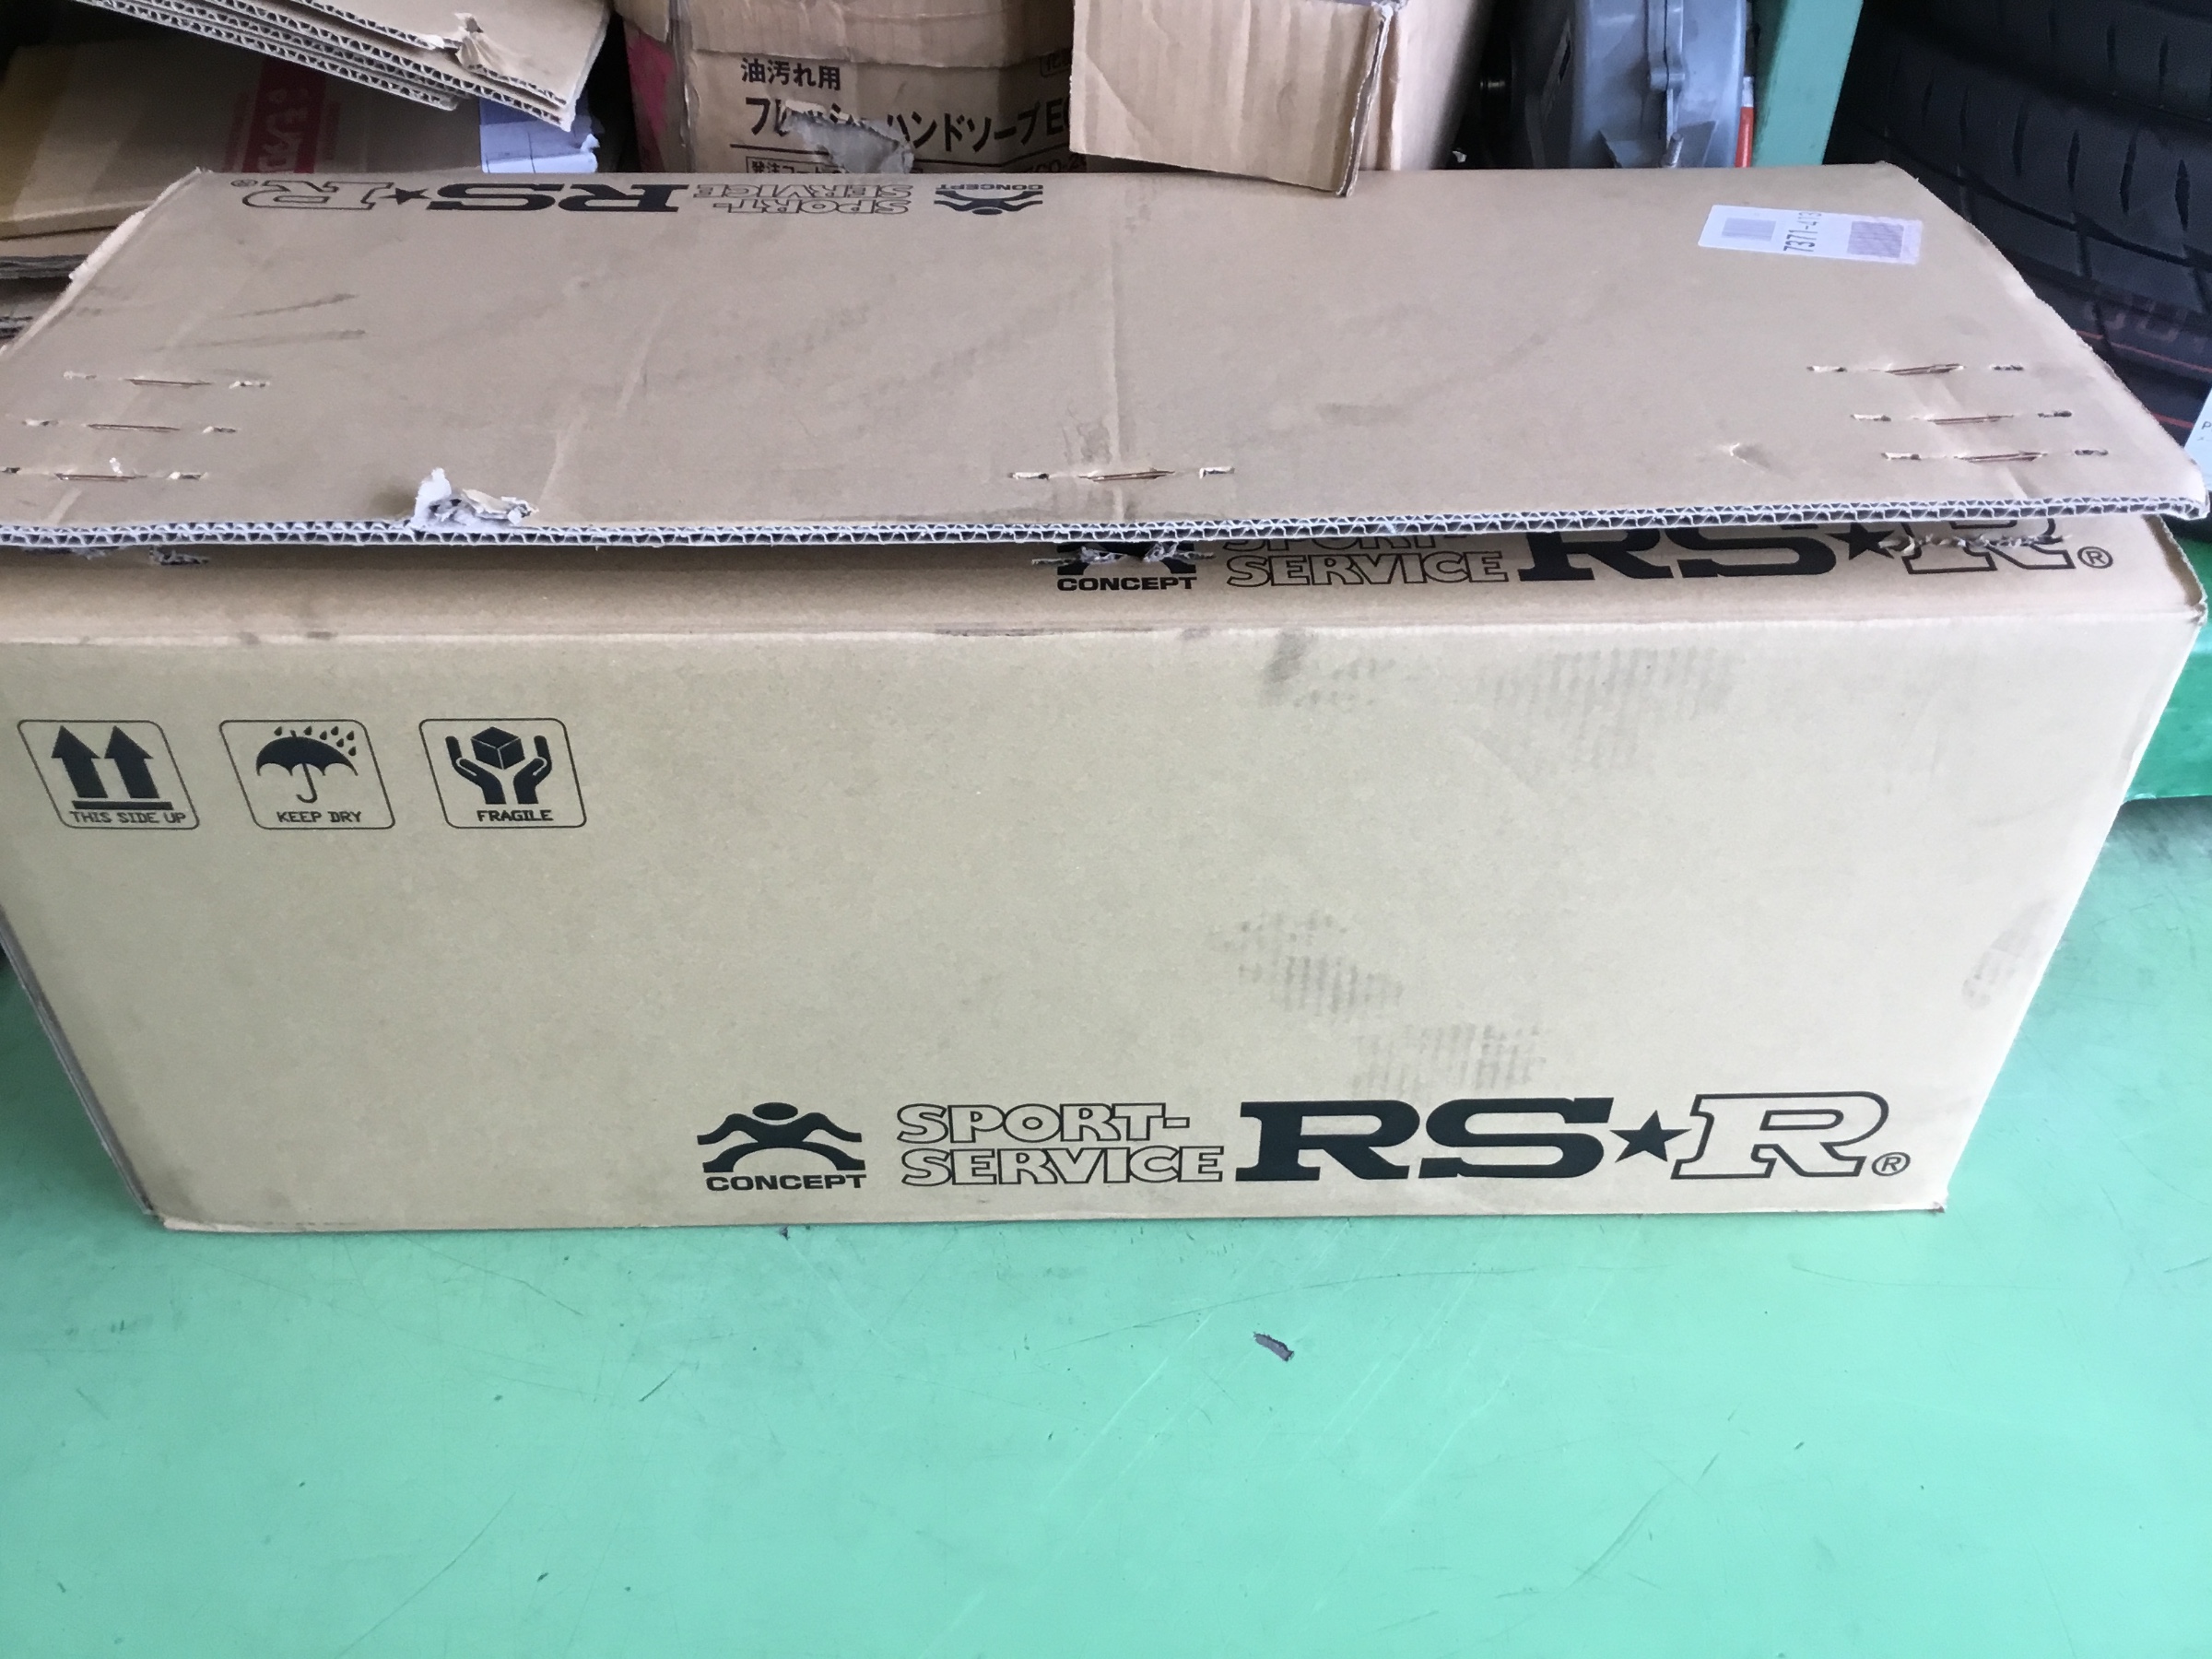 GS450h RS-R製 AVS対応車高調装着！ | レクサス GS その他 パーツ取付 